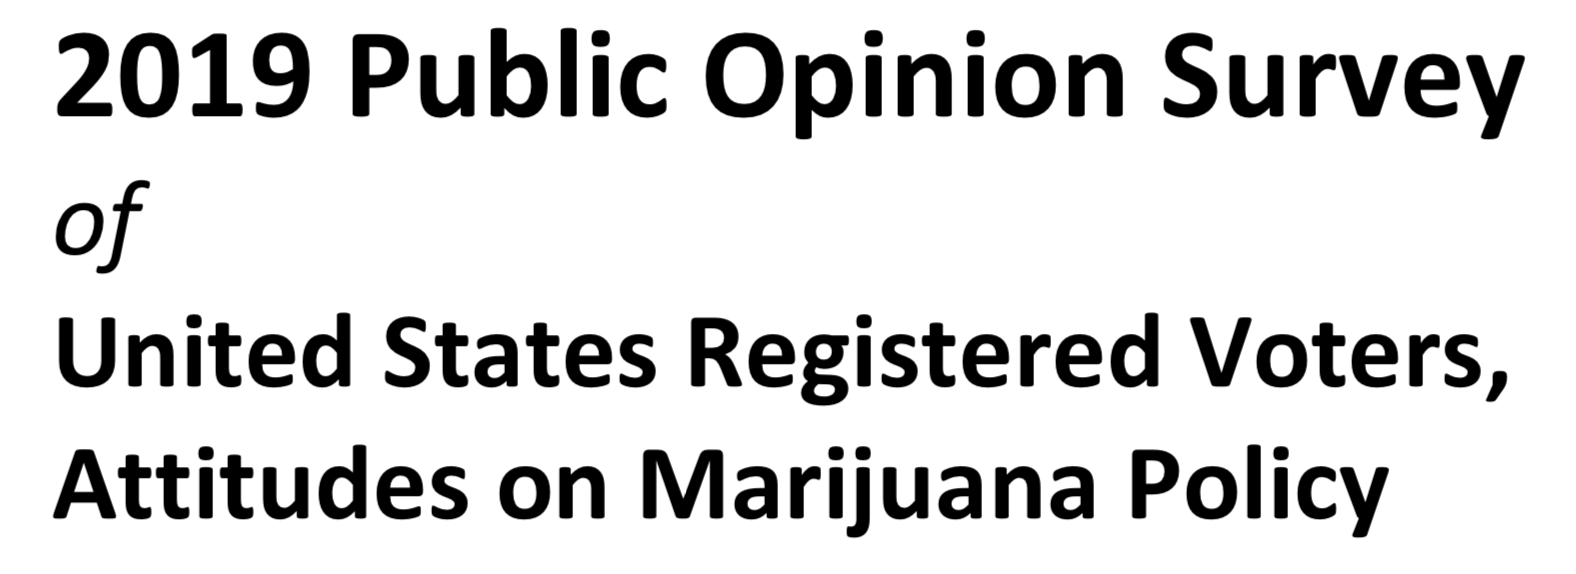 New Poll Finds 68% of Americans Favor Marijuana Policies Other Than Legalization